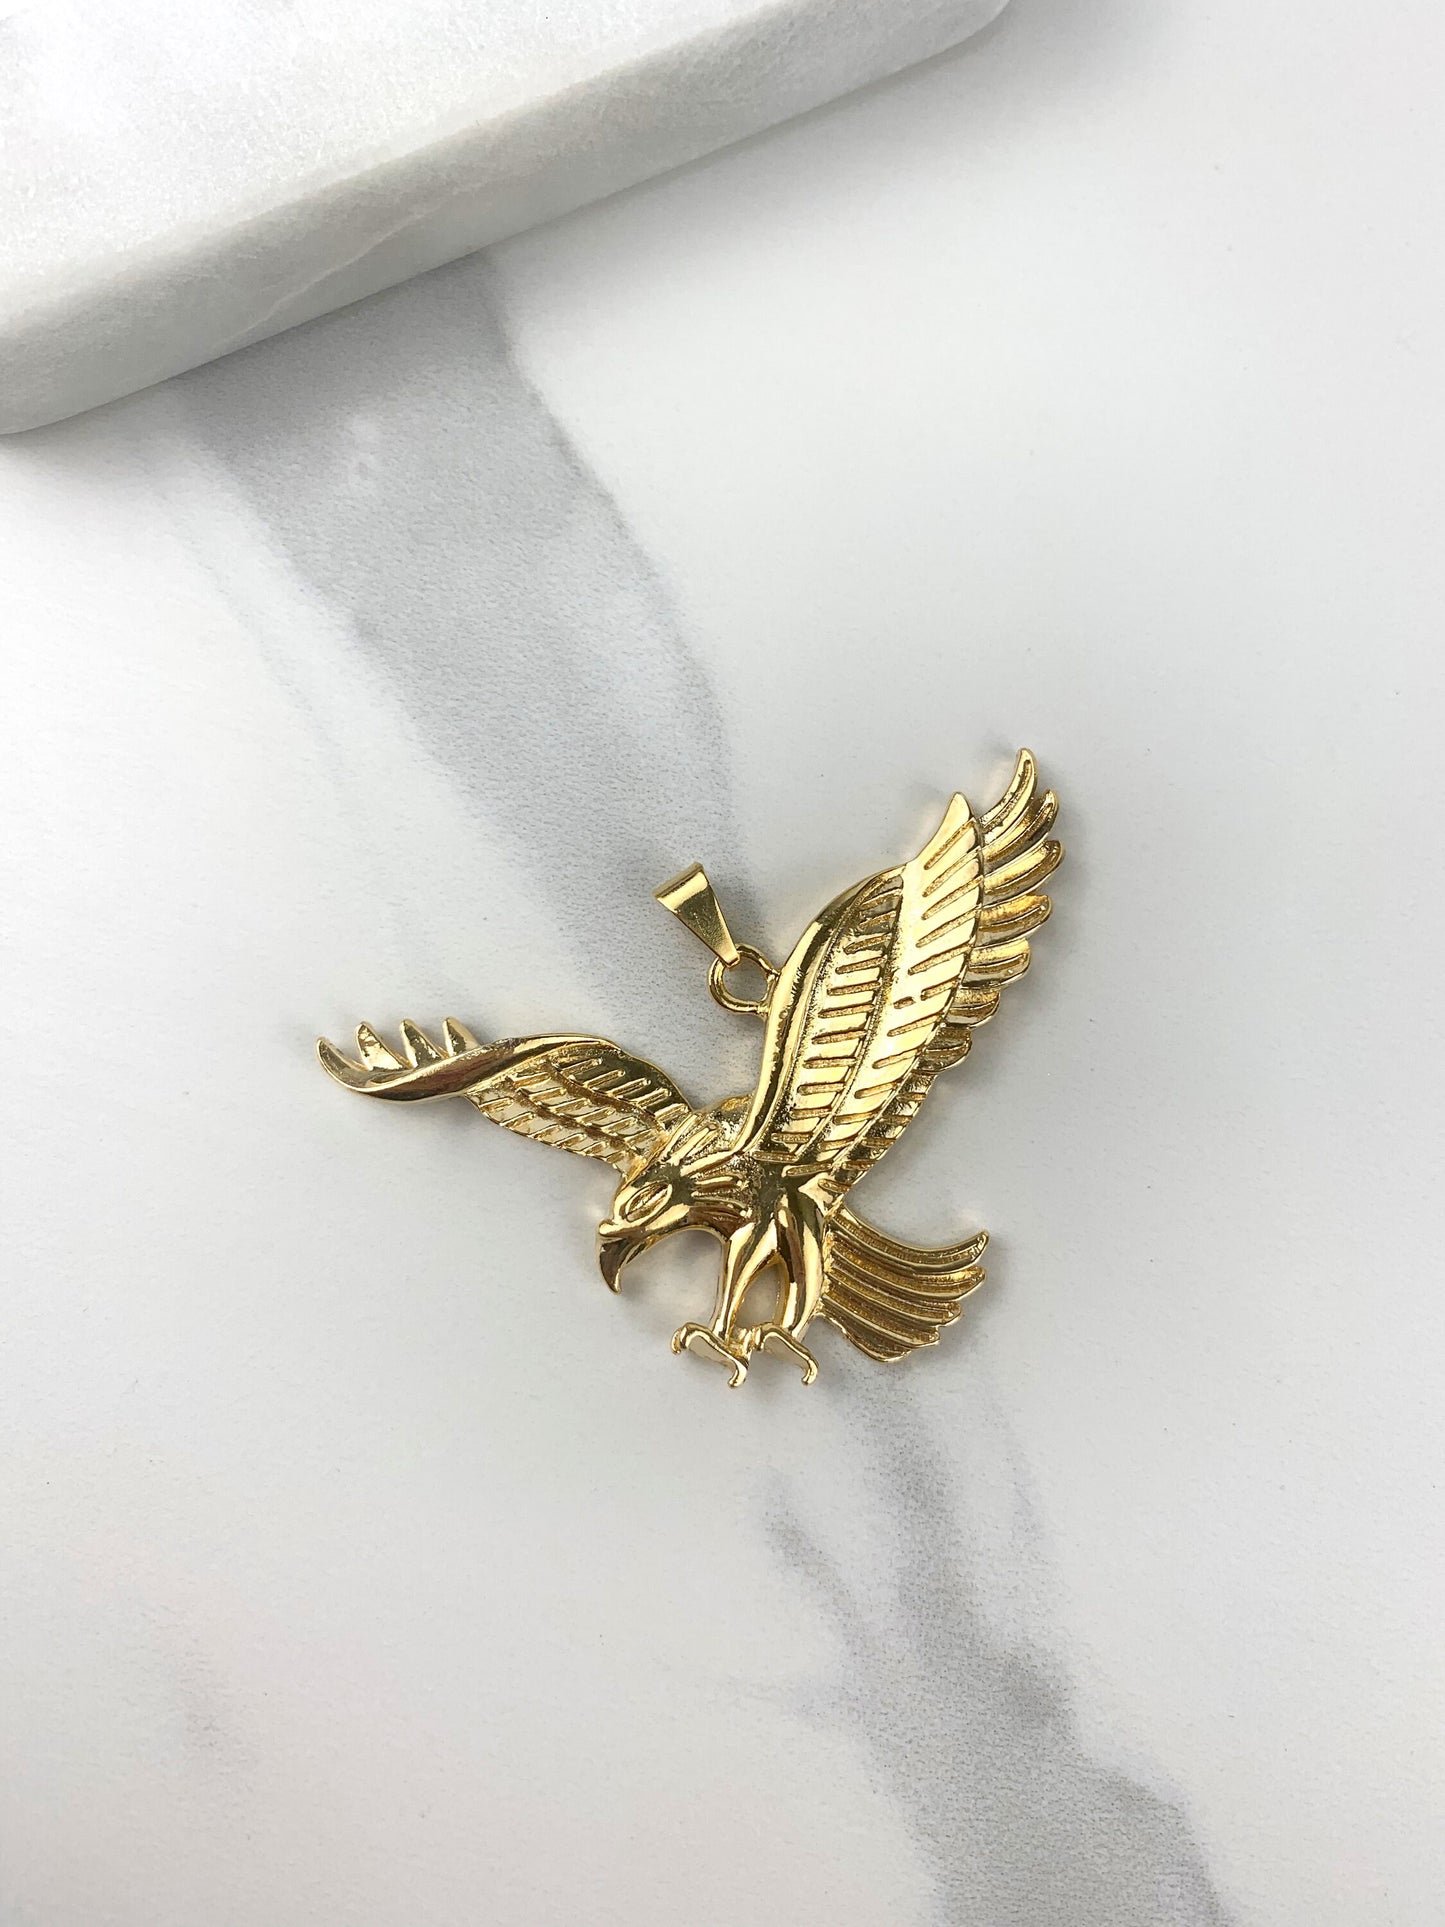 18k Gold Filled Golden American Eagle Charms Pendant Wholesale Jewelry Supplies